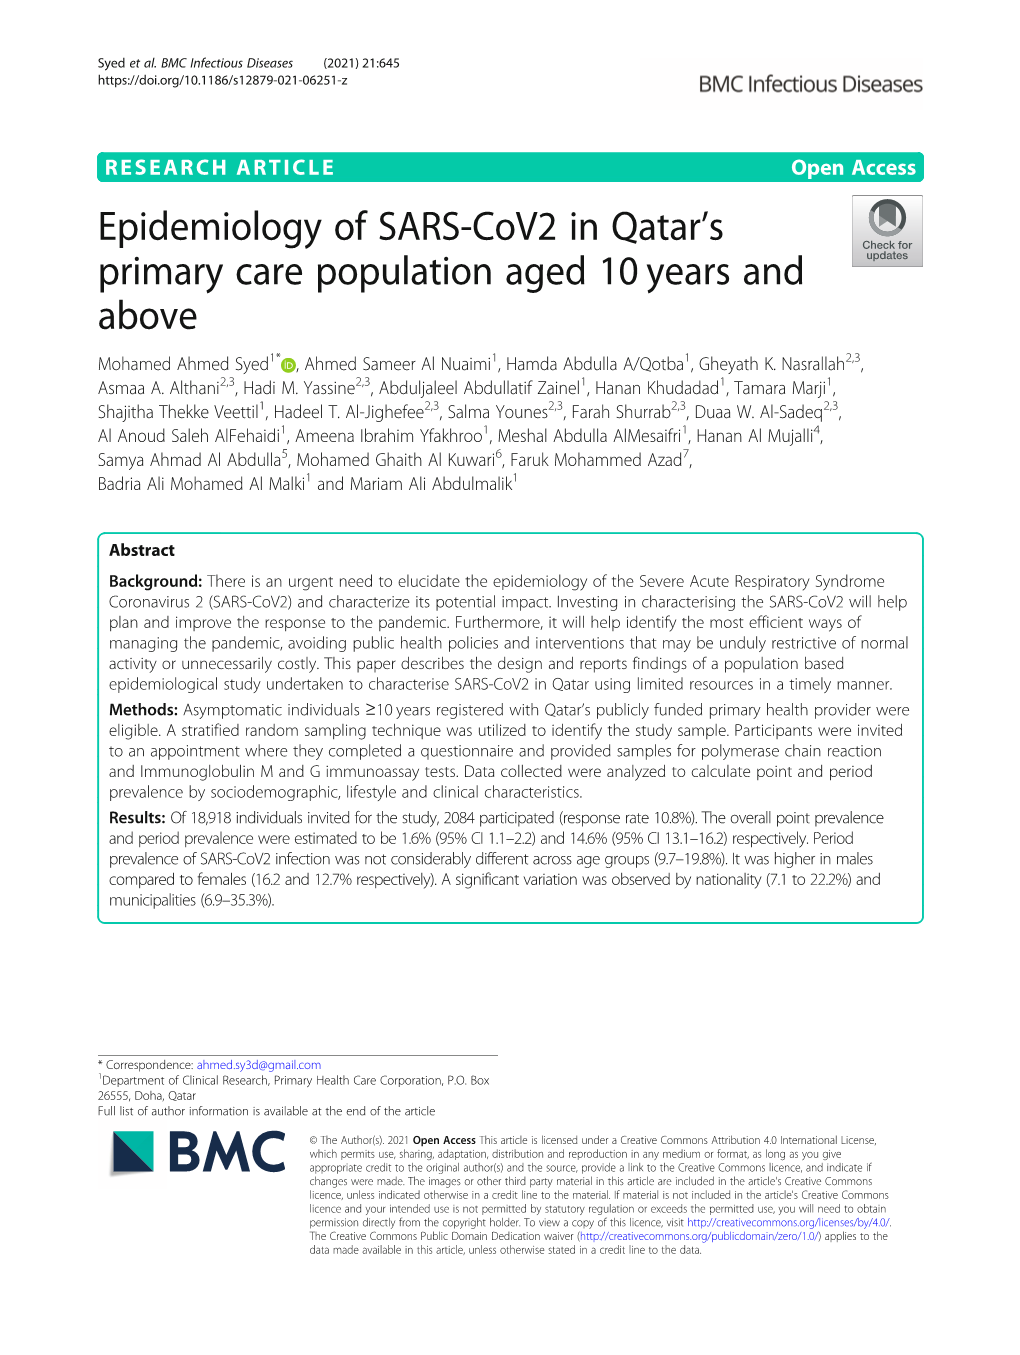 Epidemiology of SARS-Cov2 in Qatar's Primary Care Population